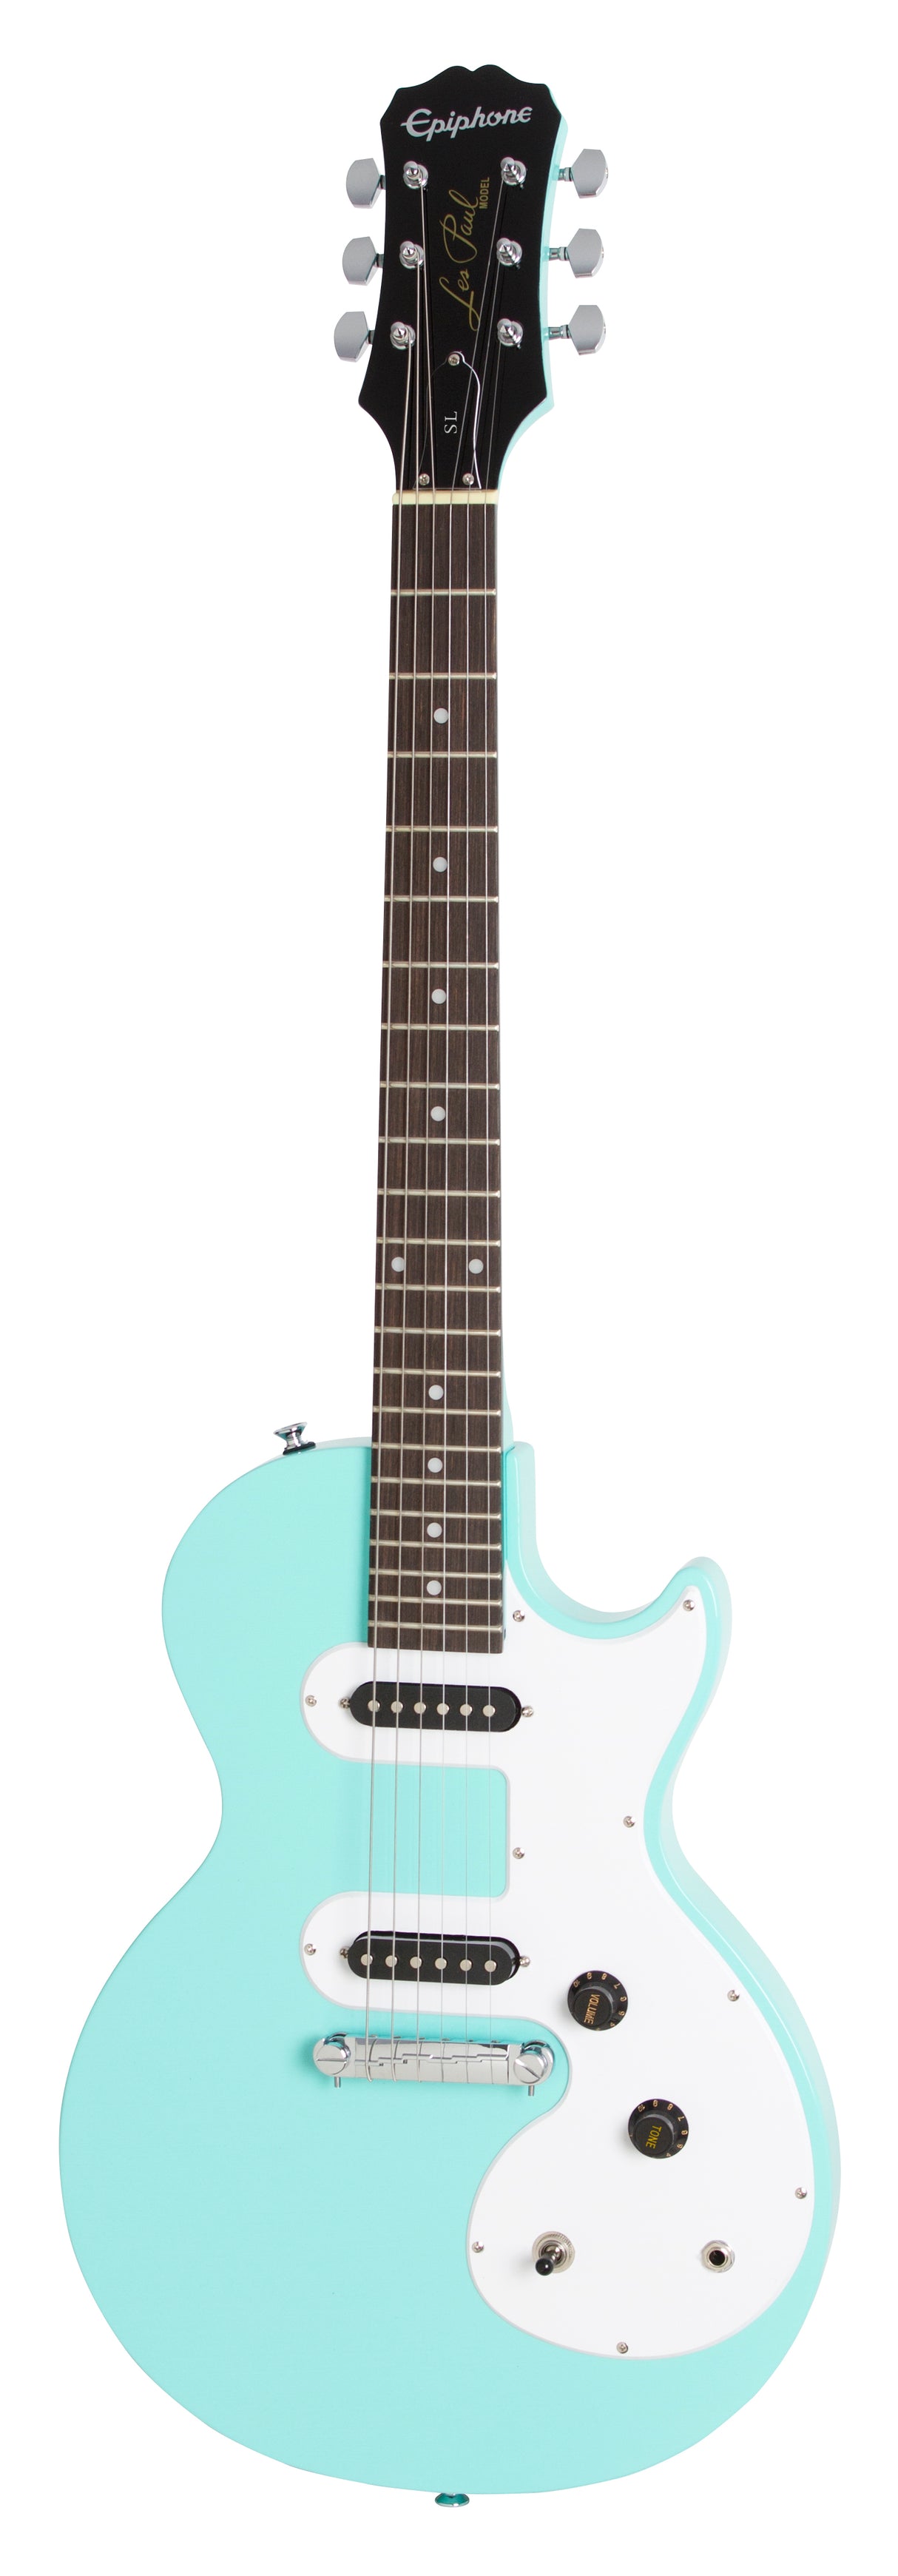 Epiphone Les Paul Melody Maker E1 Electric Guitar, Turquoise